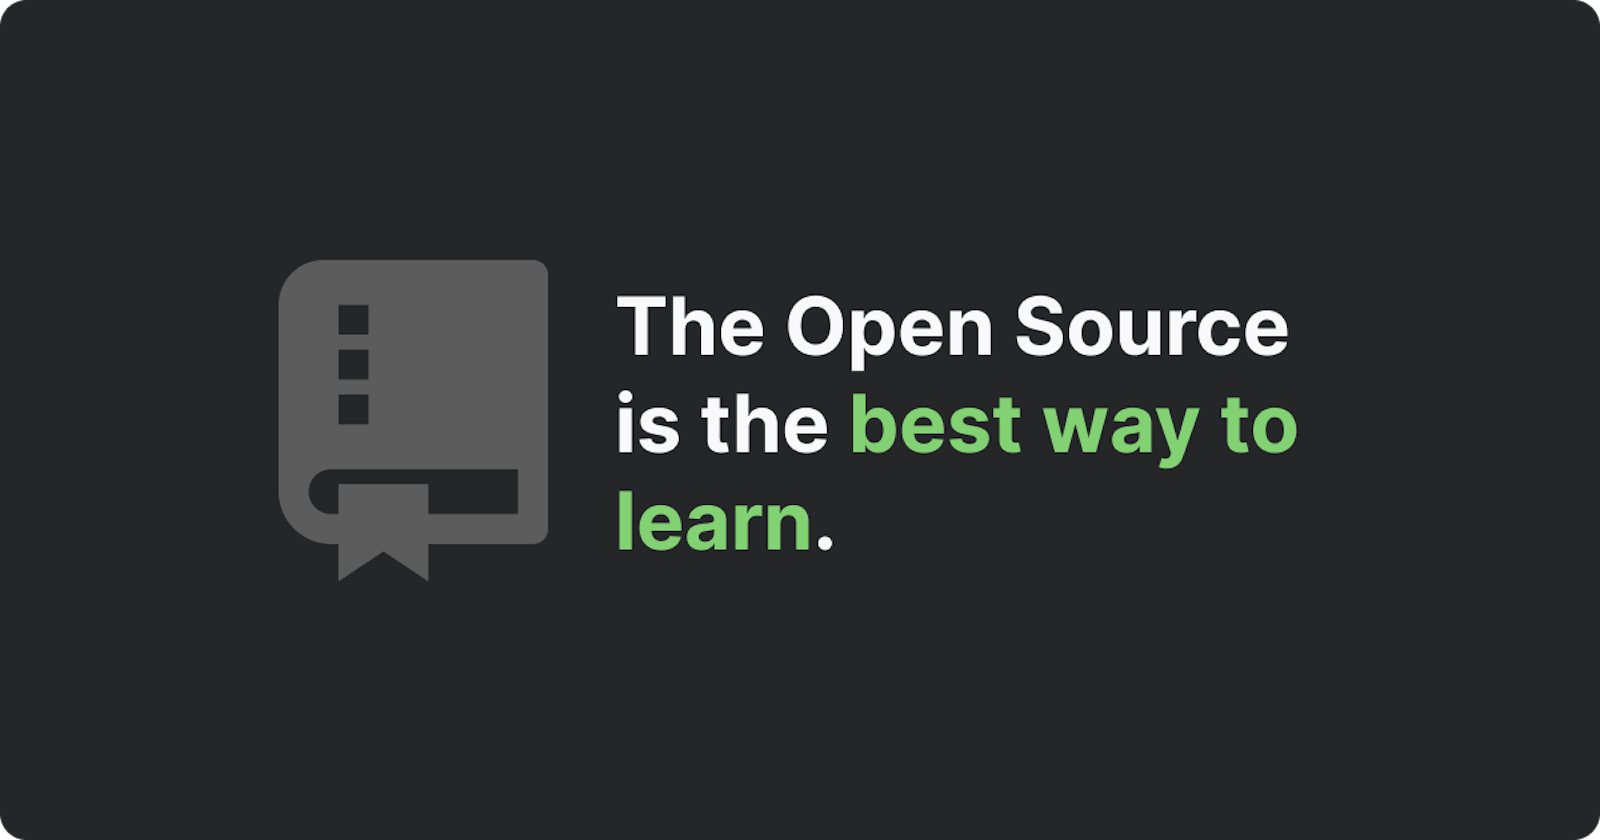 The Open Source is the best way to learn!